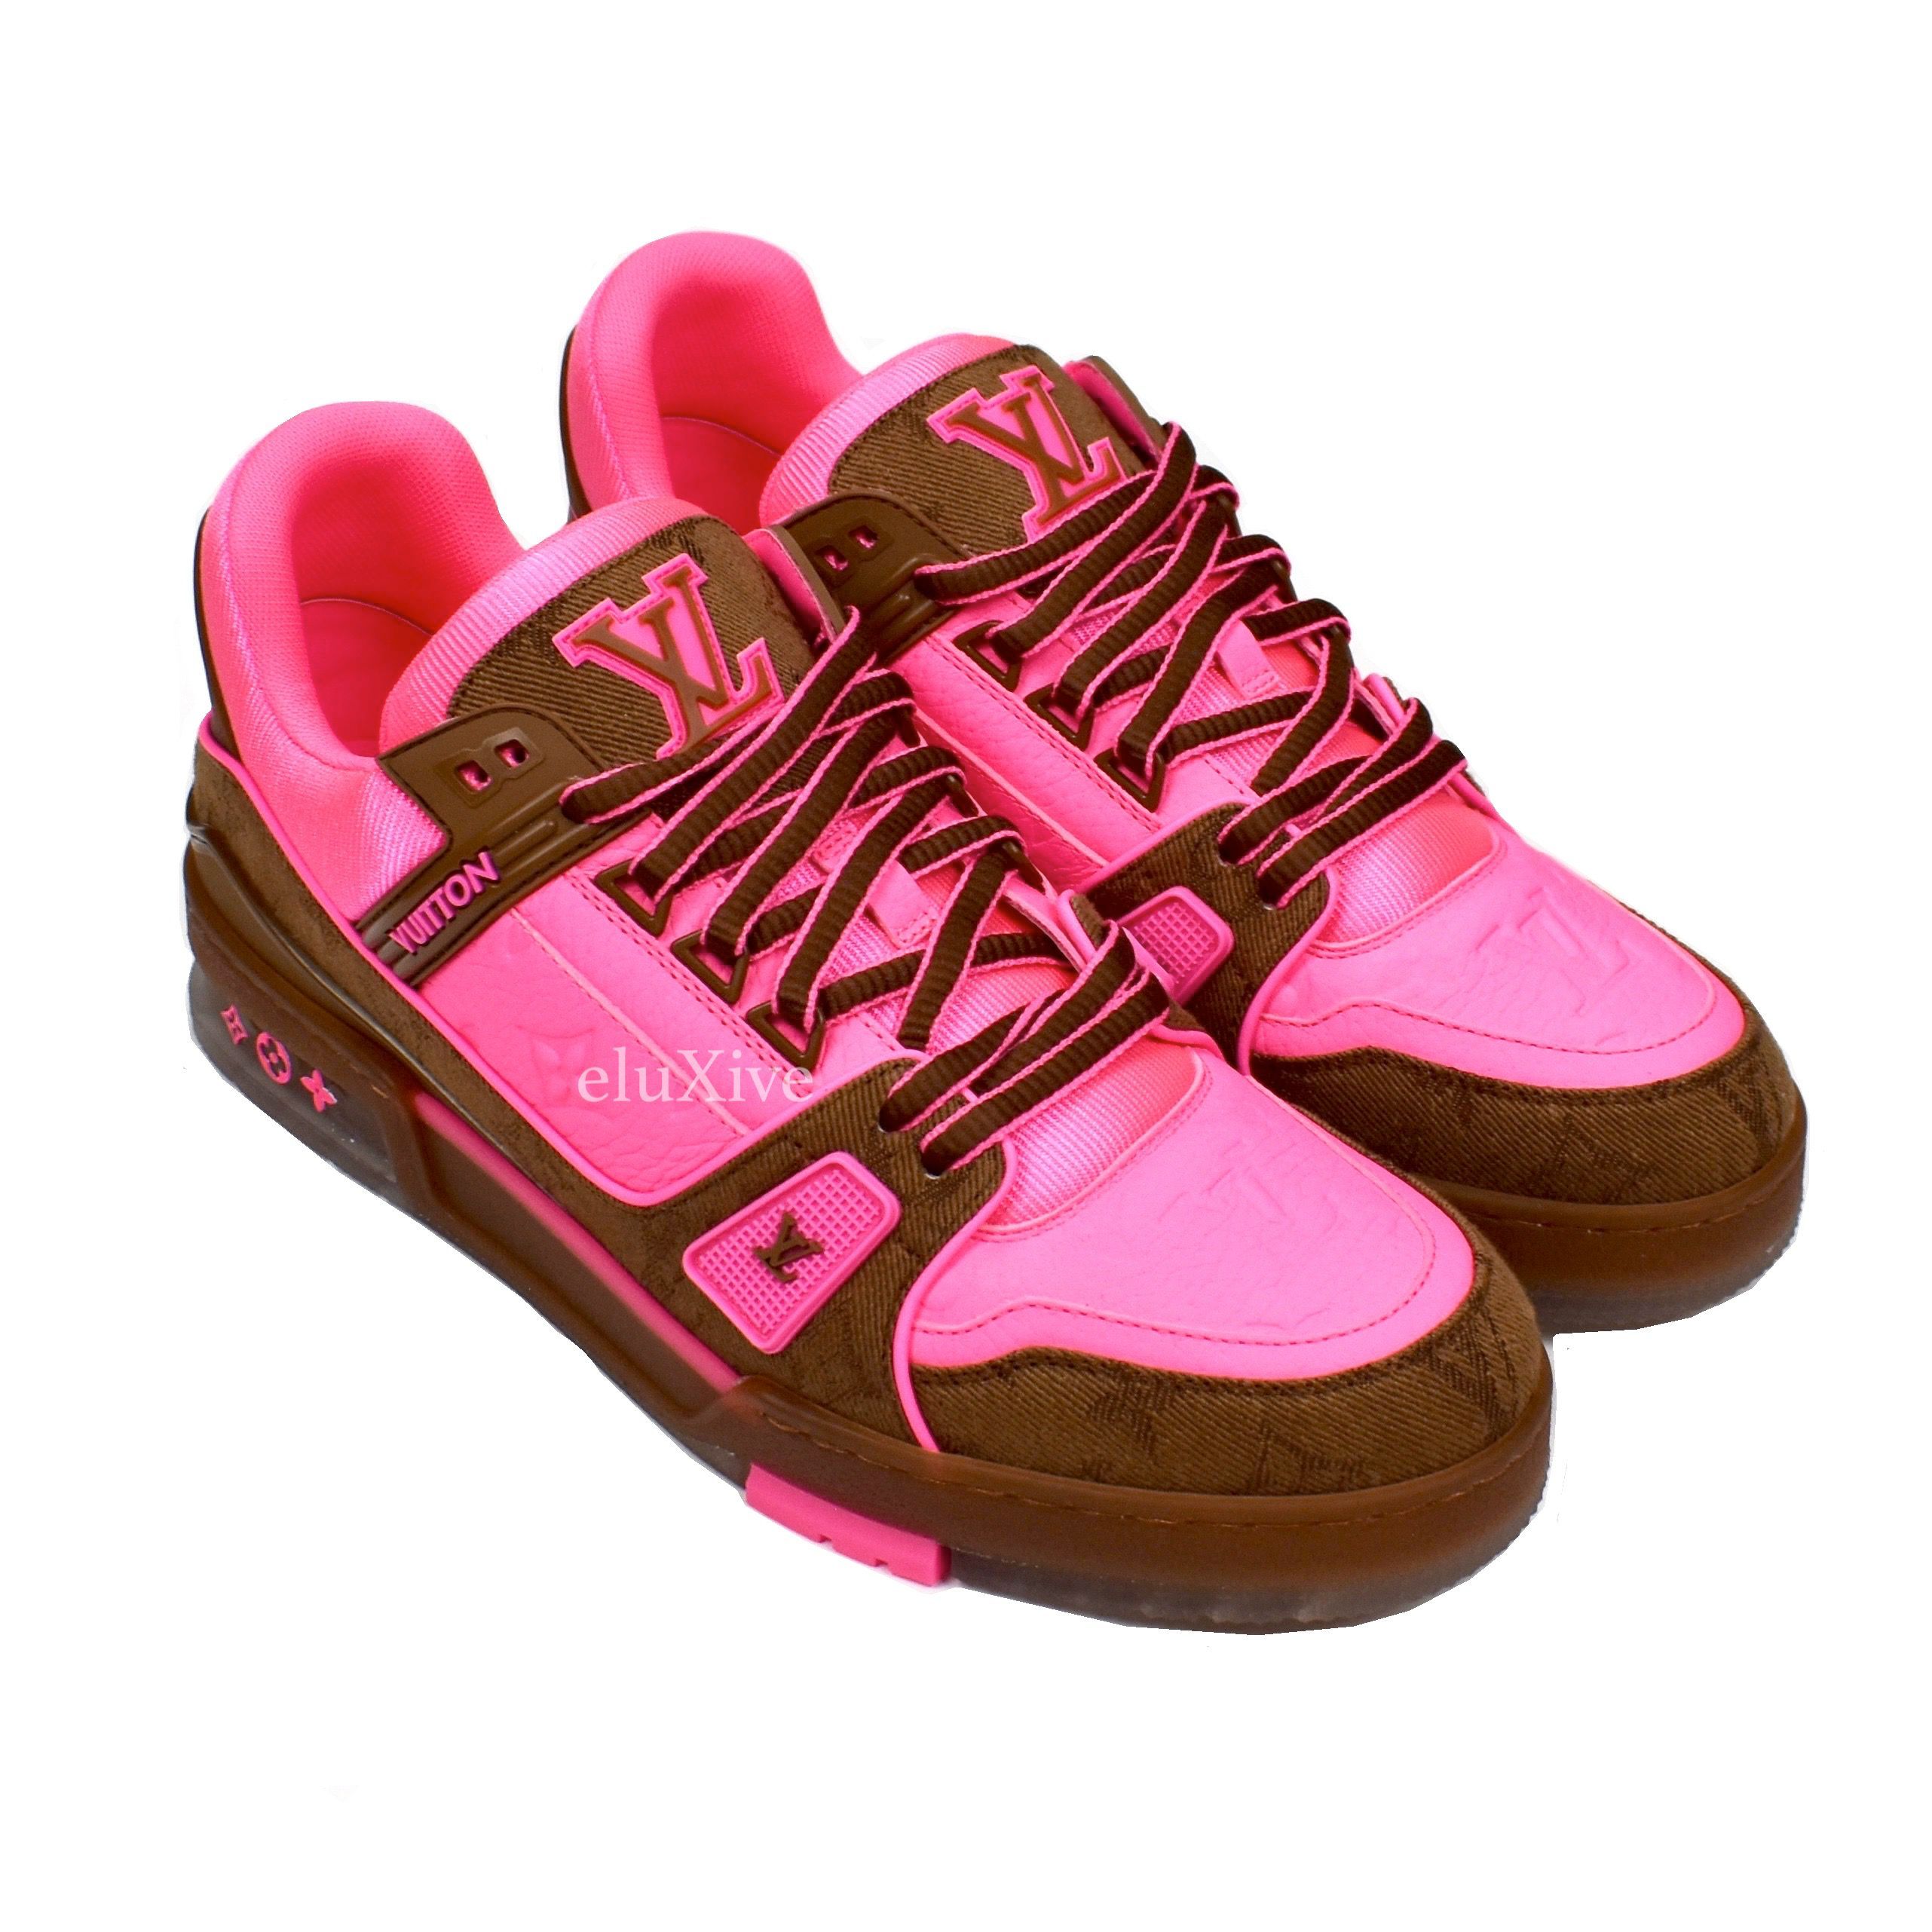 Louis Vuitton Trainer Pink Rose Sneakers From @Danyelle